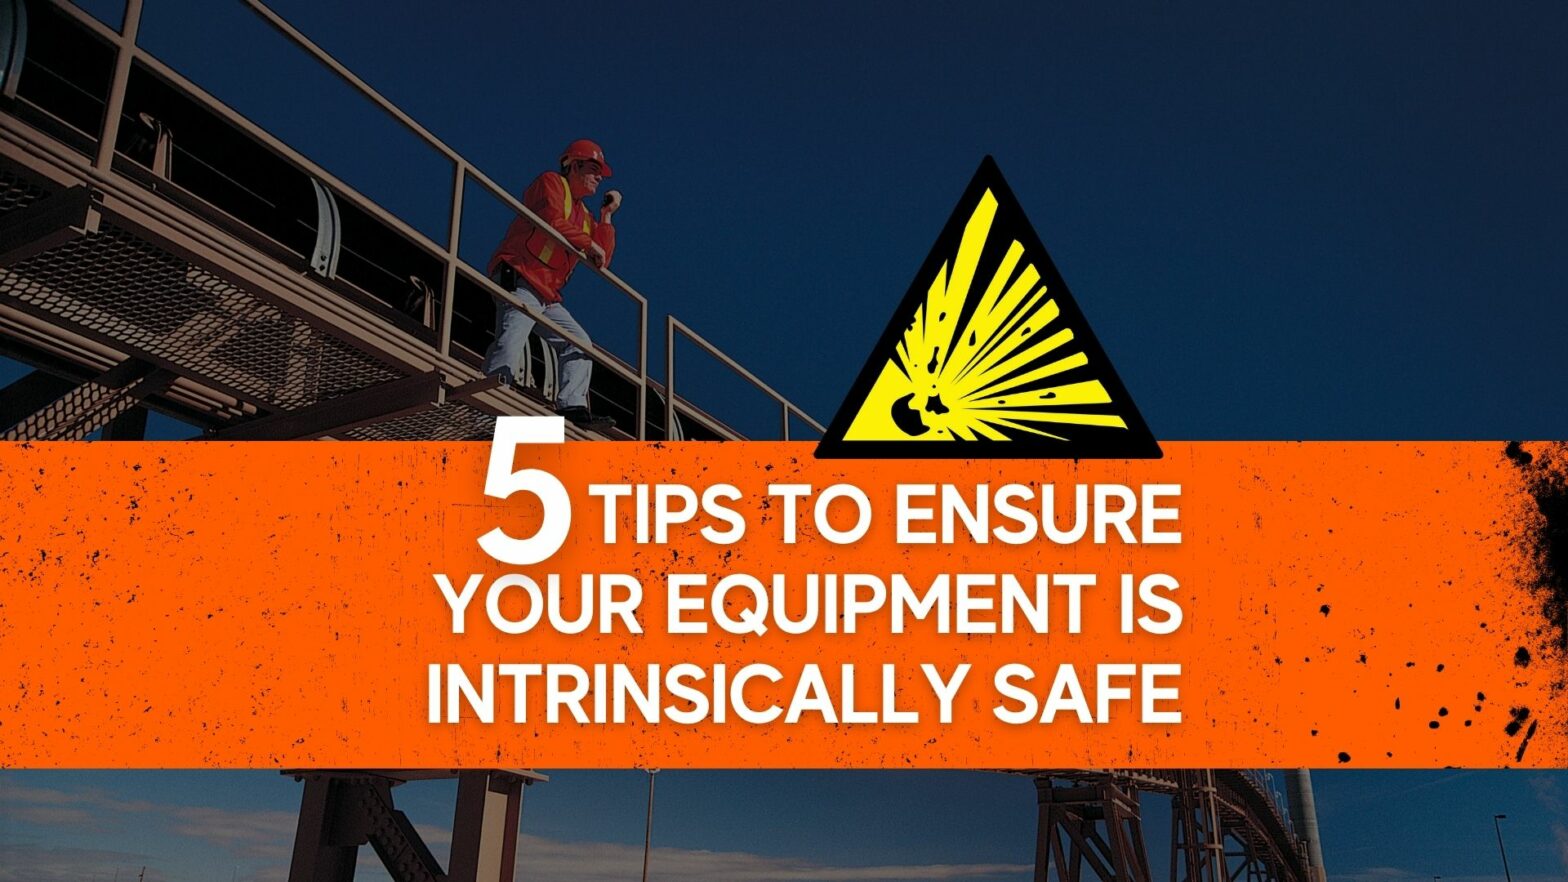 5 Tips to Ensure Your Equipment is Intrinsically Safe